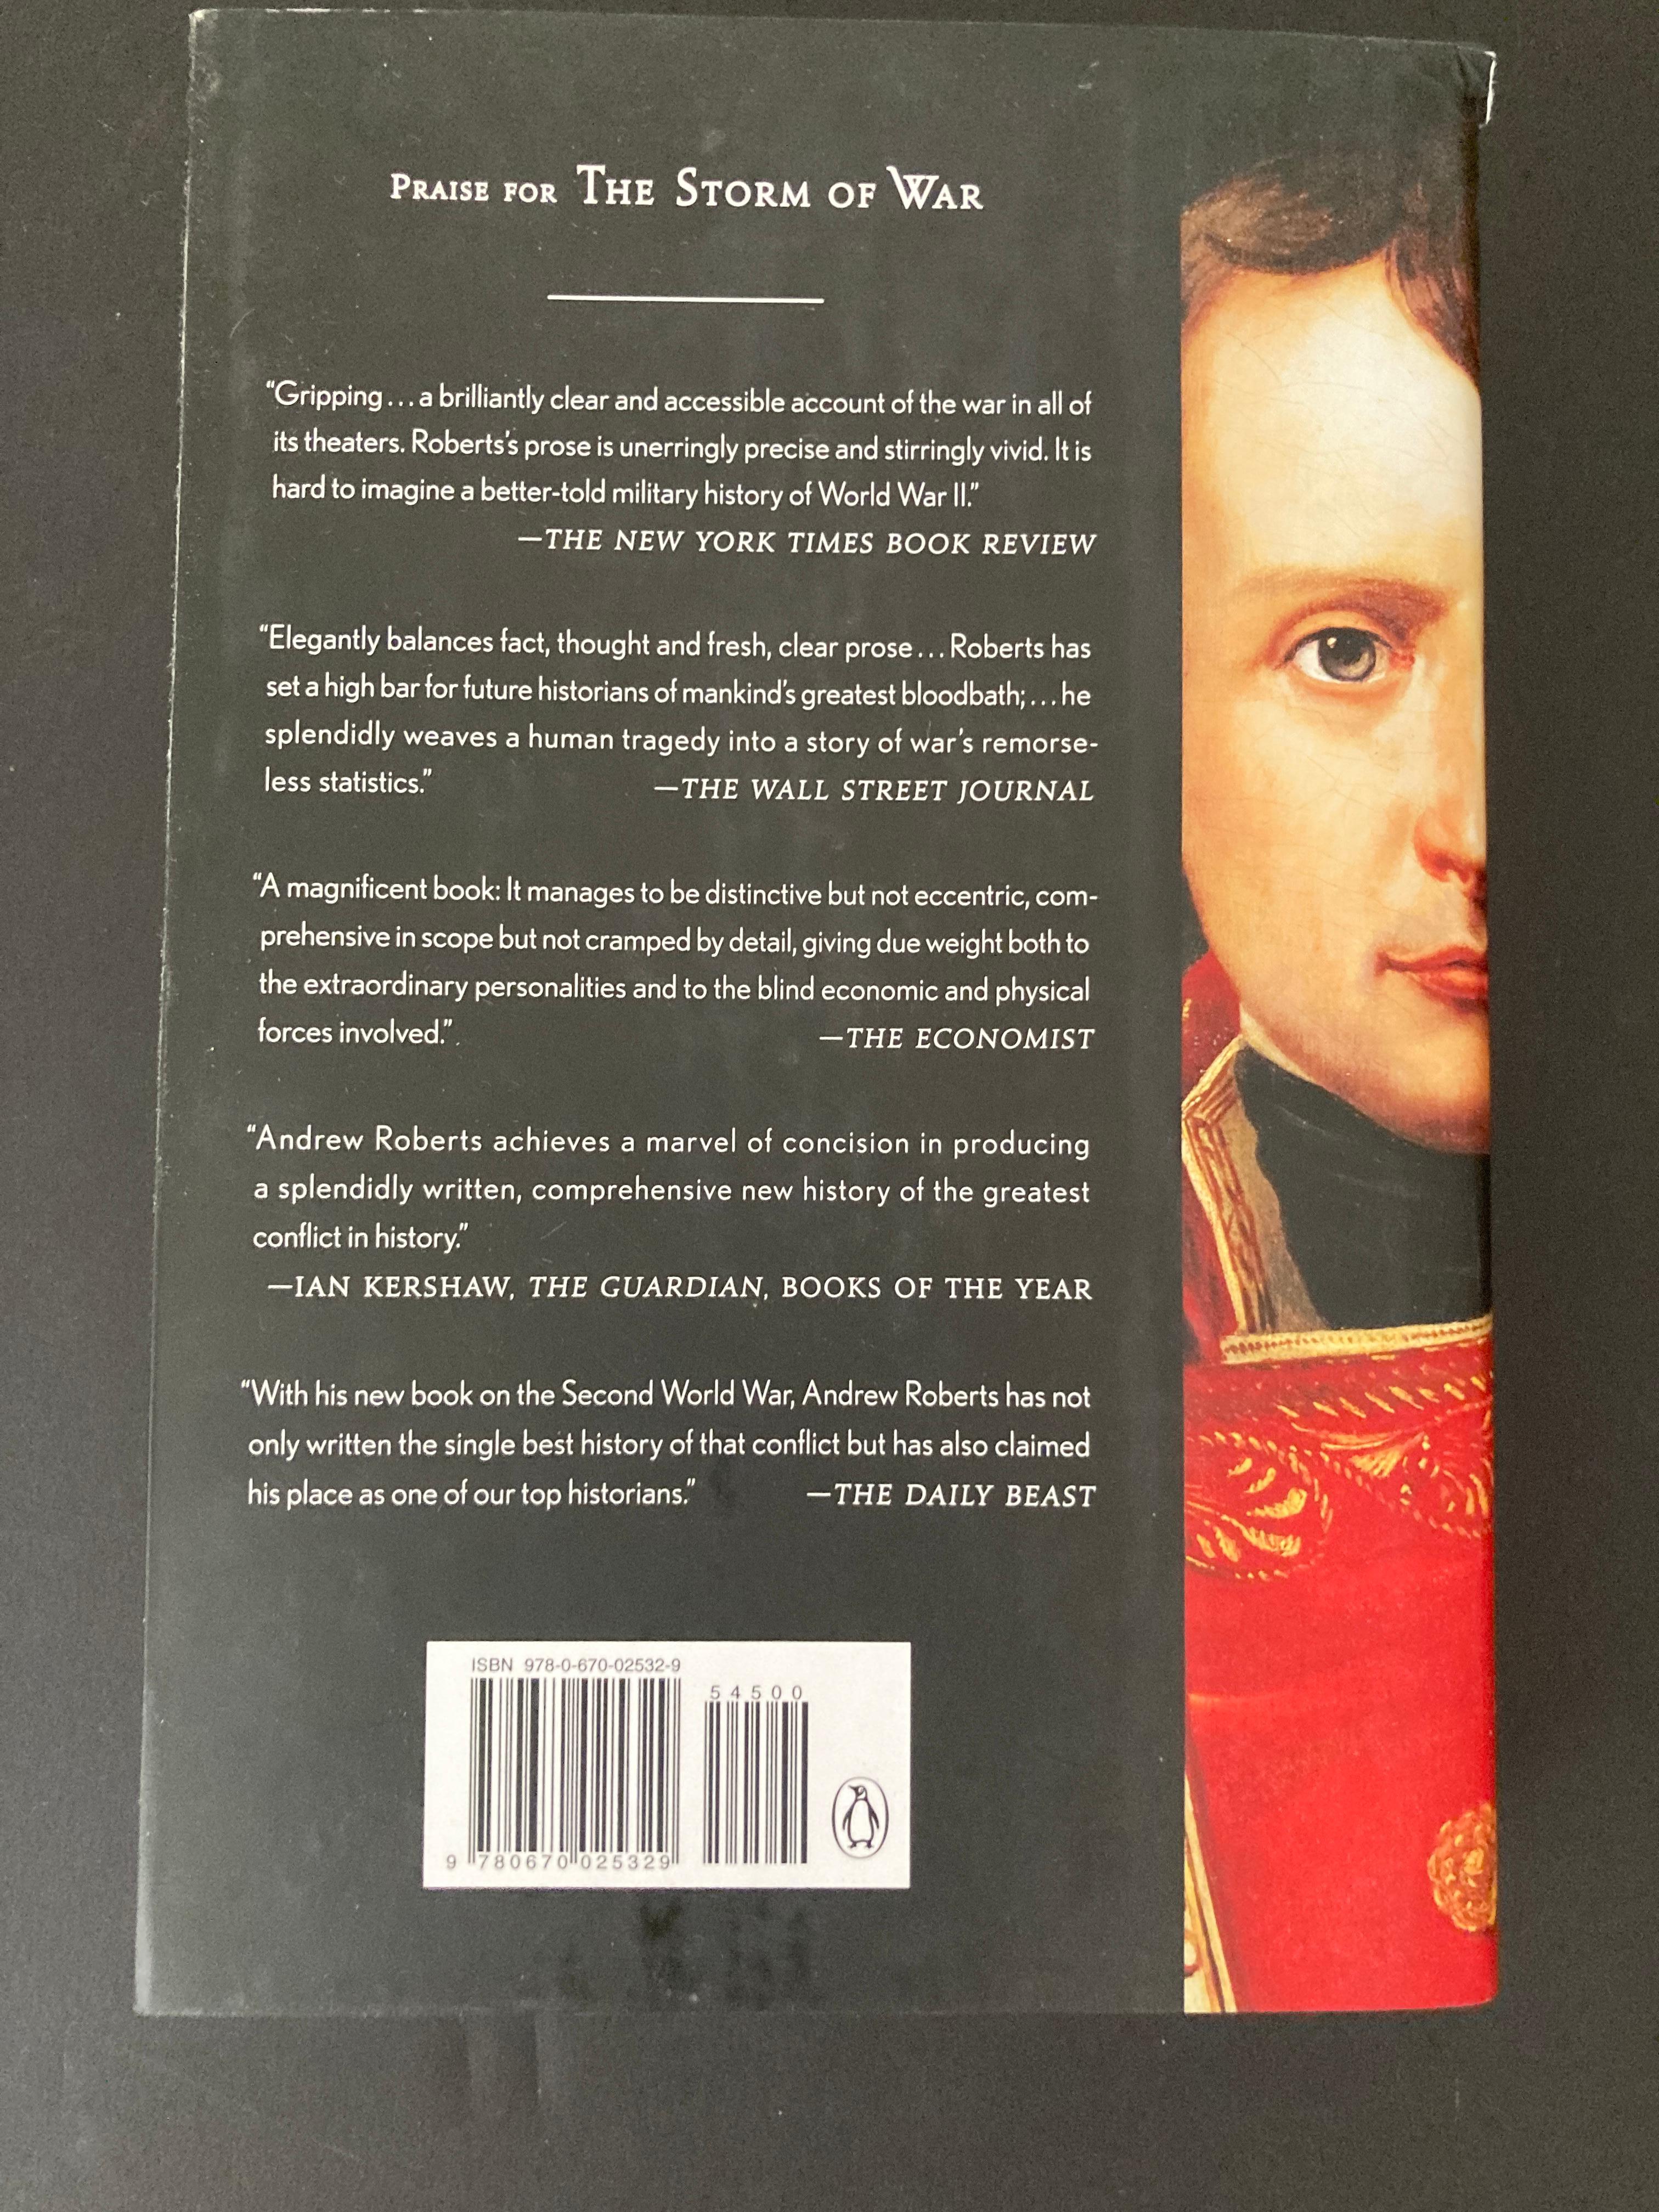 European Napoleon A Life by Andrew Robe Hardcover Book